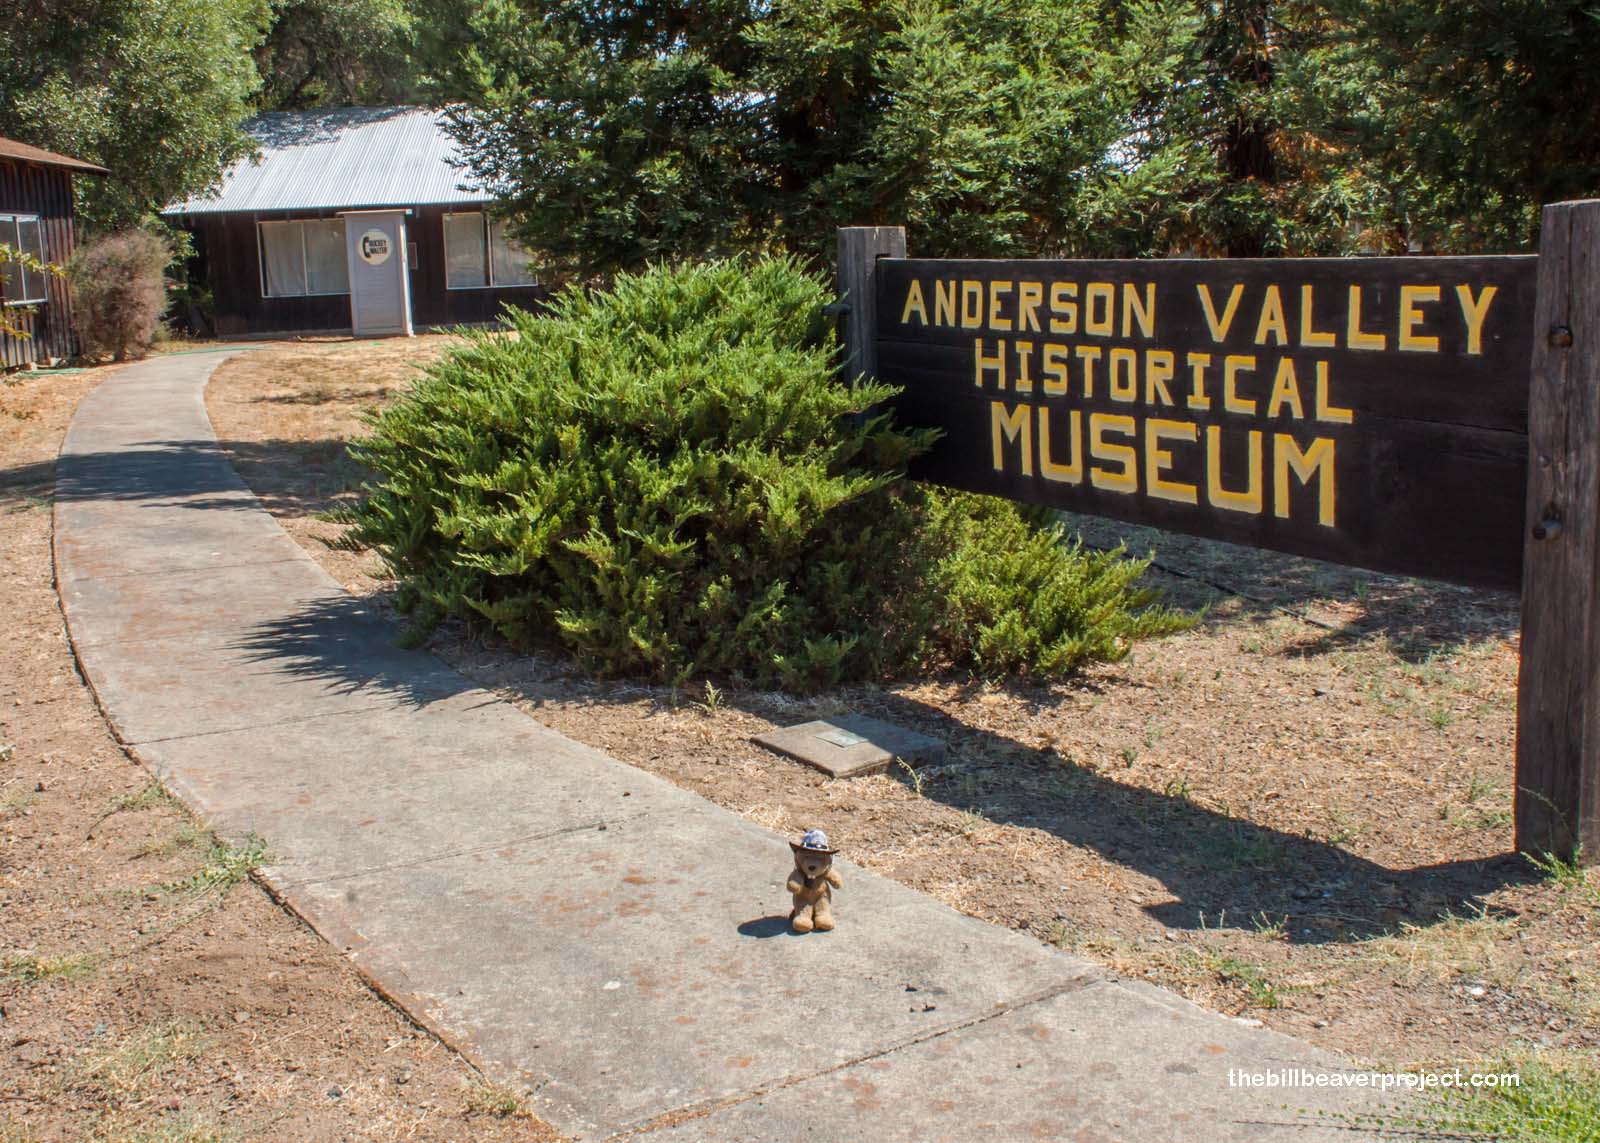 Anderson Valley Historical Museum